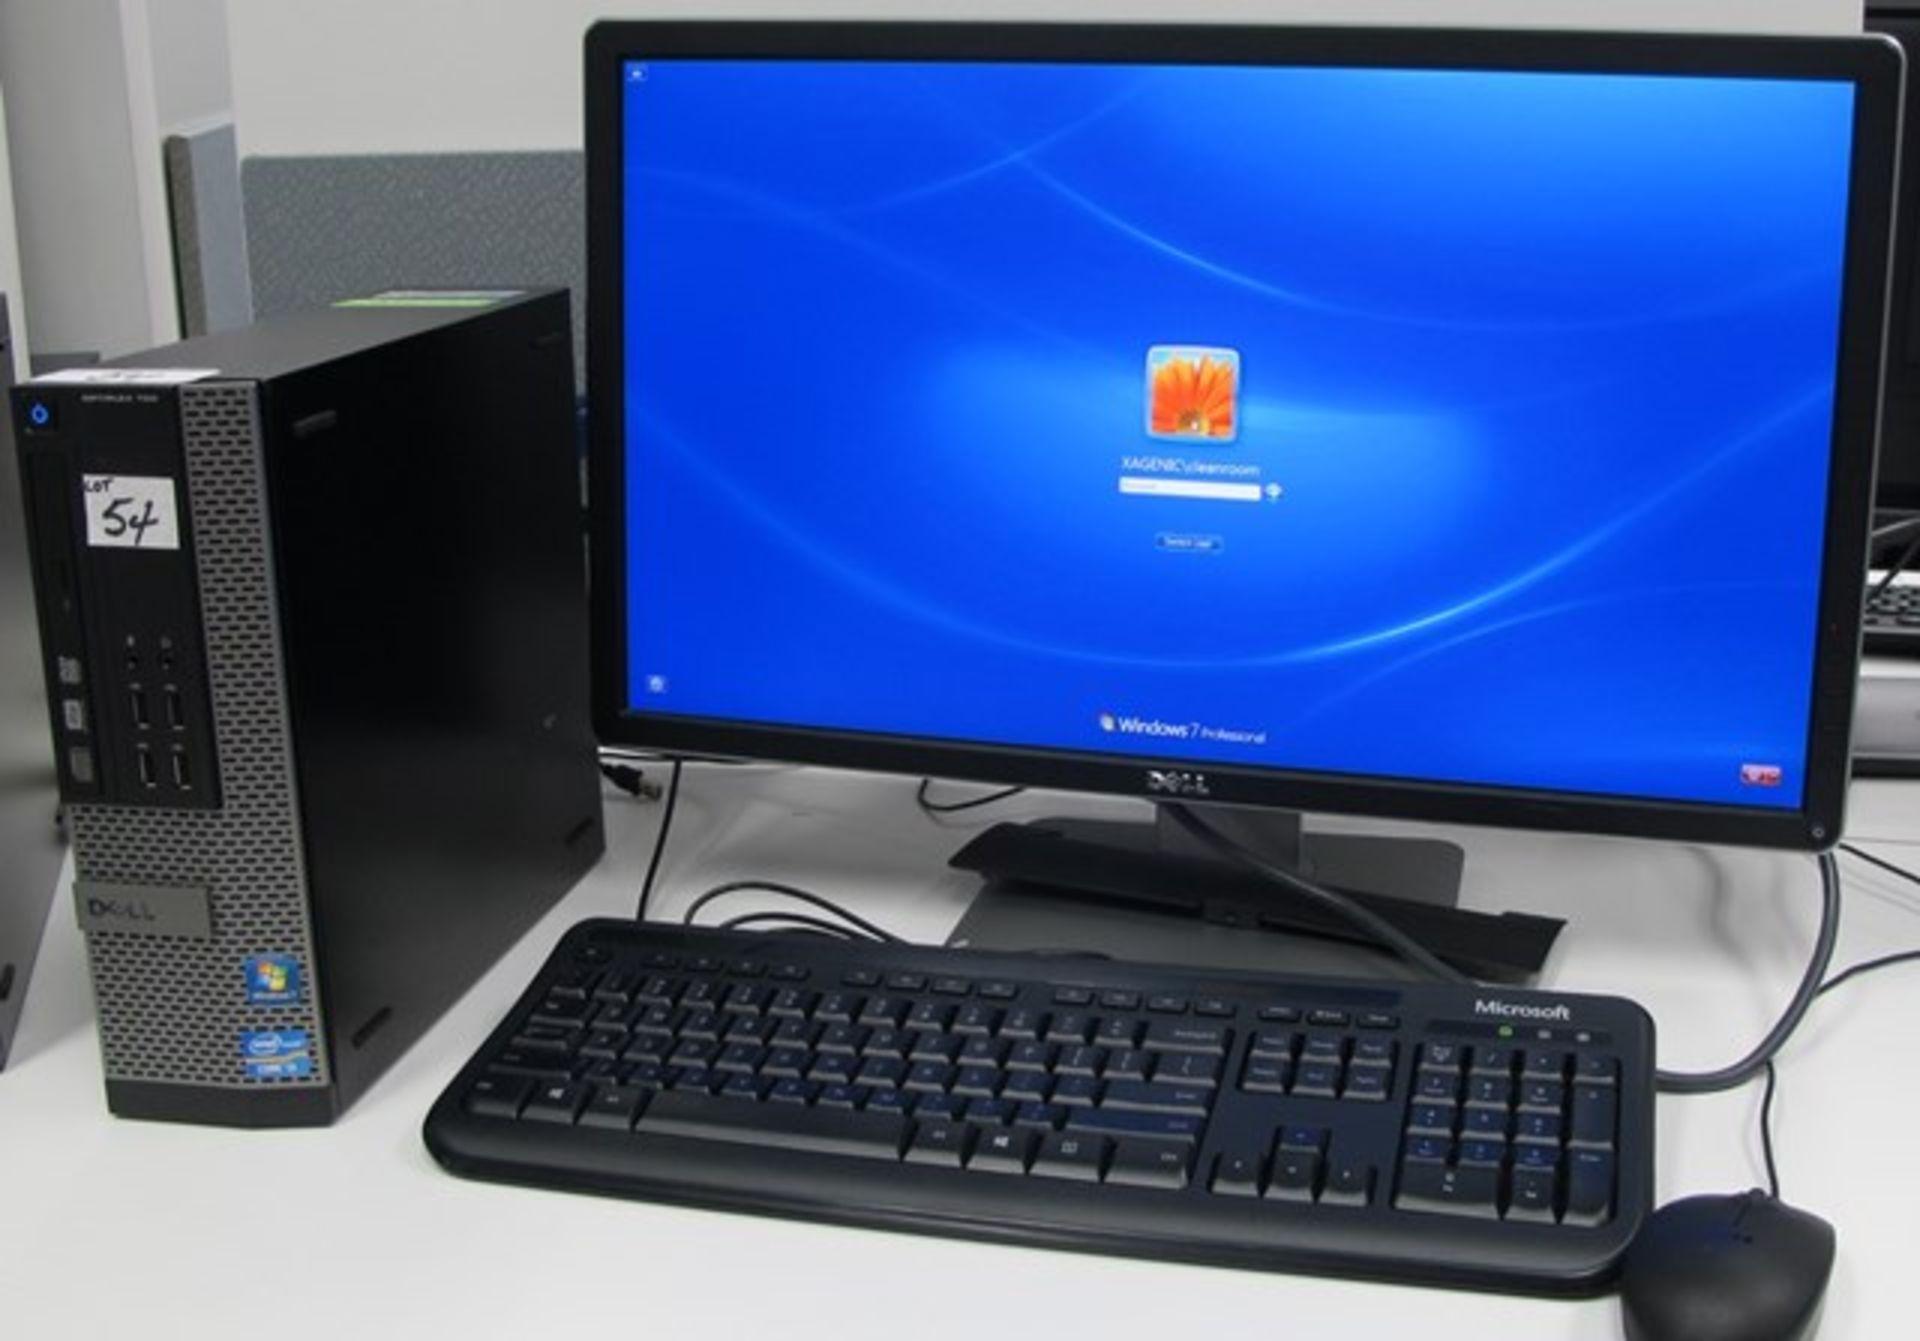 DELL OPTIPLEX 790 i3 TOWER COMPUTER W/ MONITOR, KEYBOARD, MOUSE (WINDOWS 7)